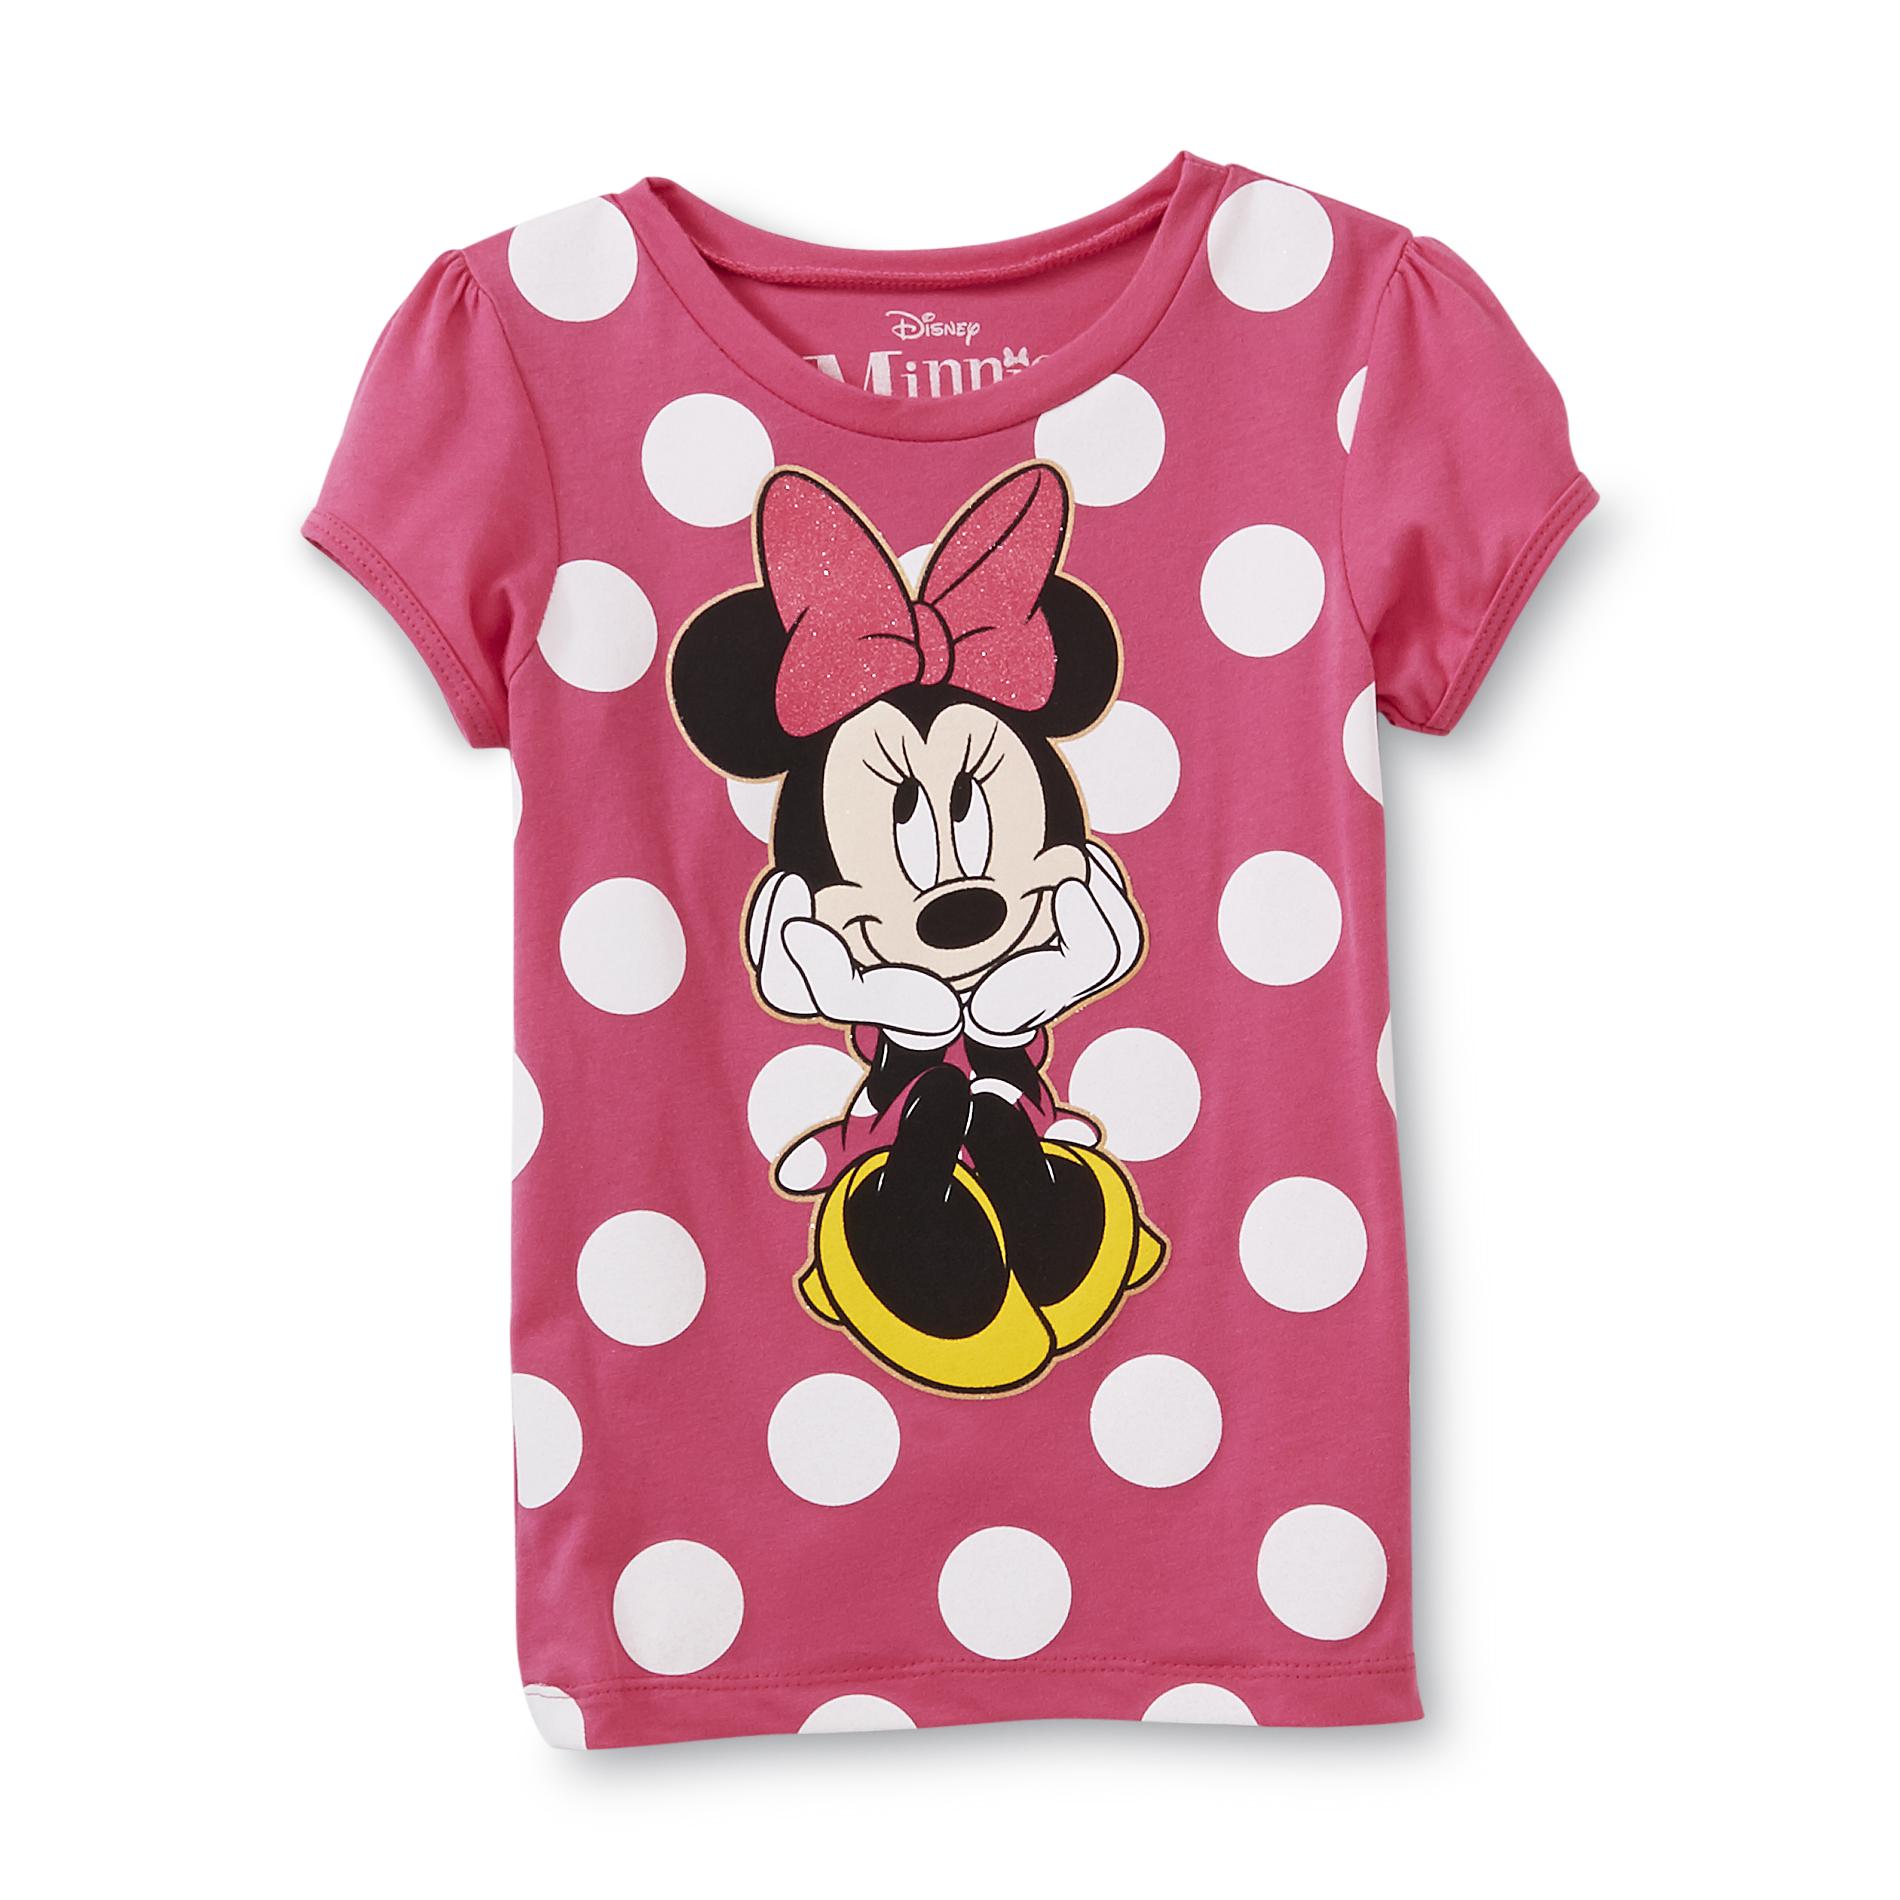 Disney Minnie Mouse Girl's Graphic T-Shirt - Dots